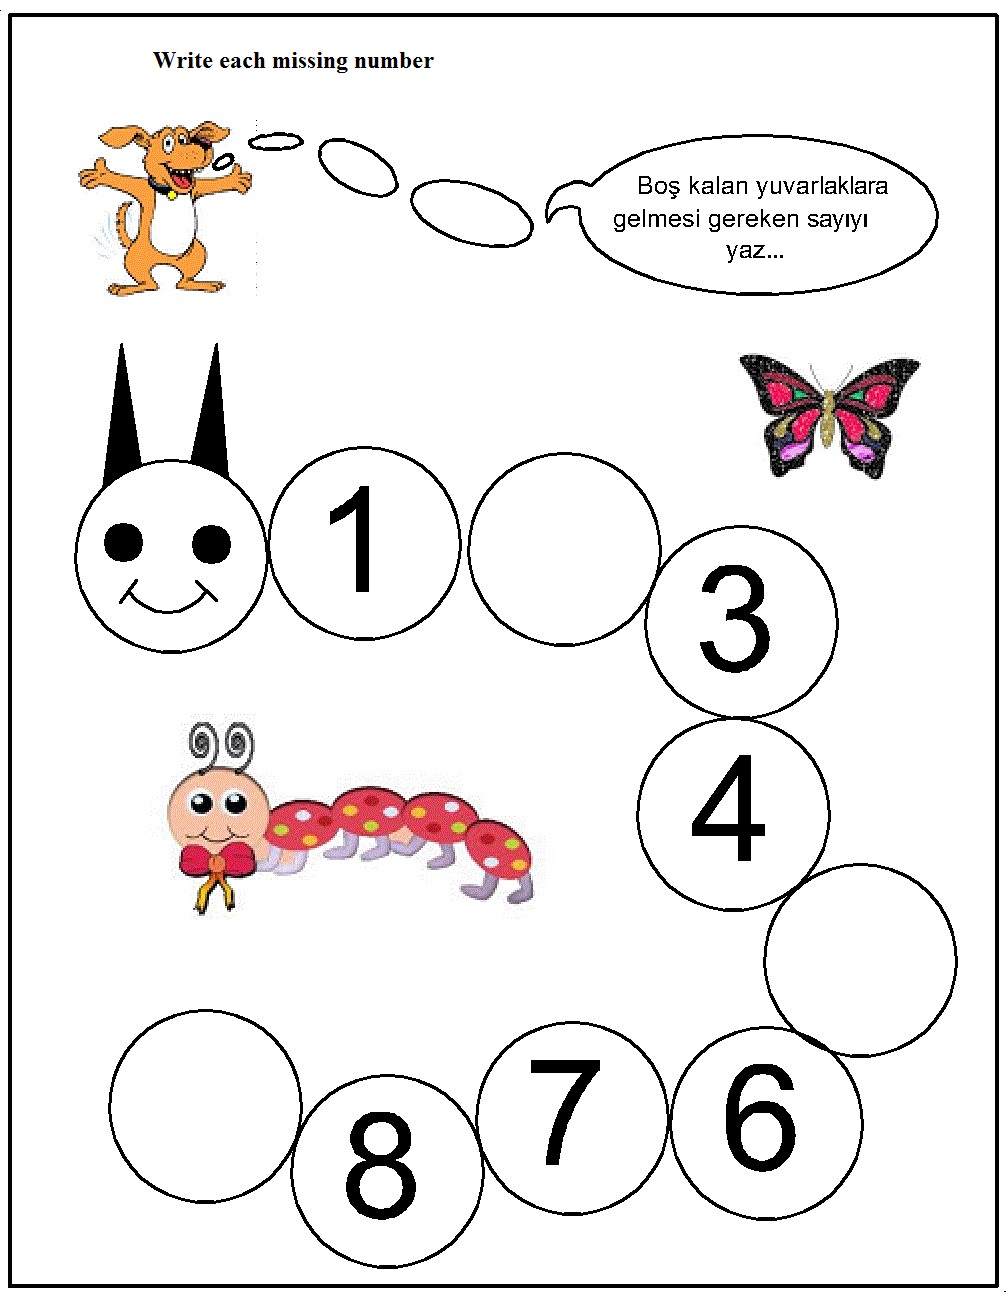 dinosaur-themed-missing-numbers-1-to-5-worksheet-missing-number-and-writing-numbers-1-5-and-1